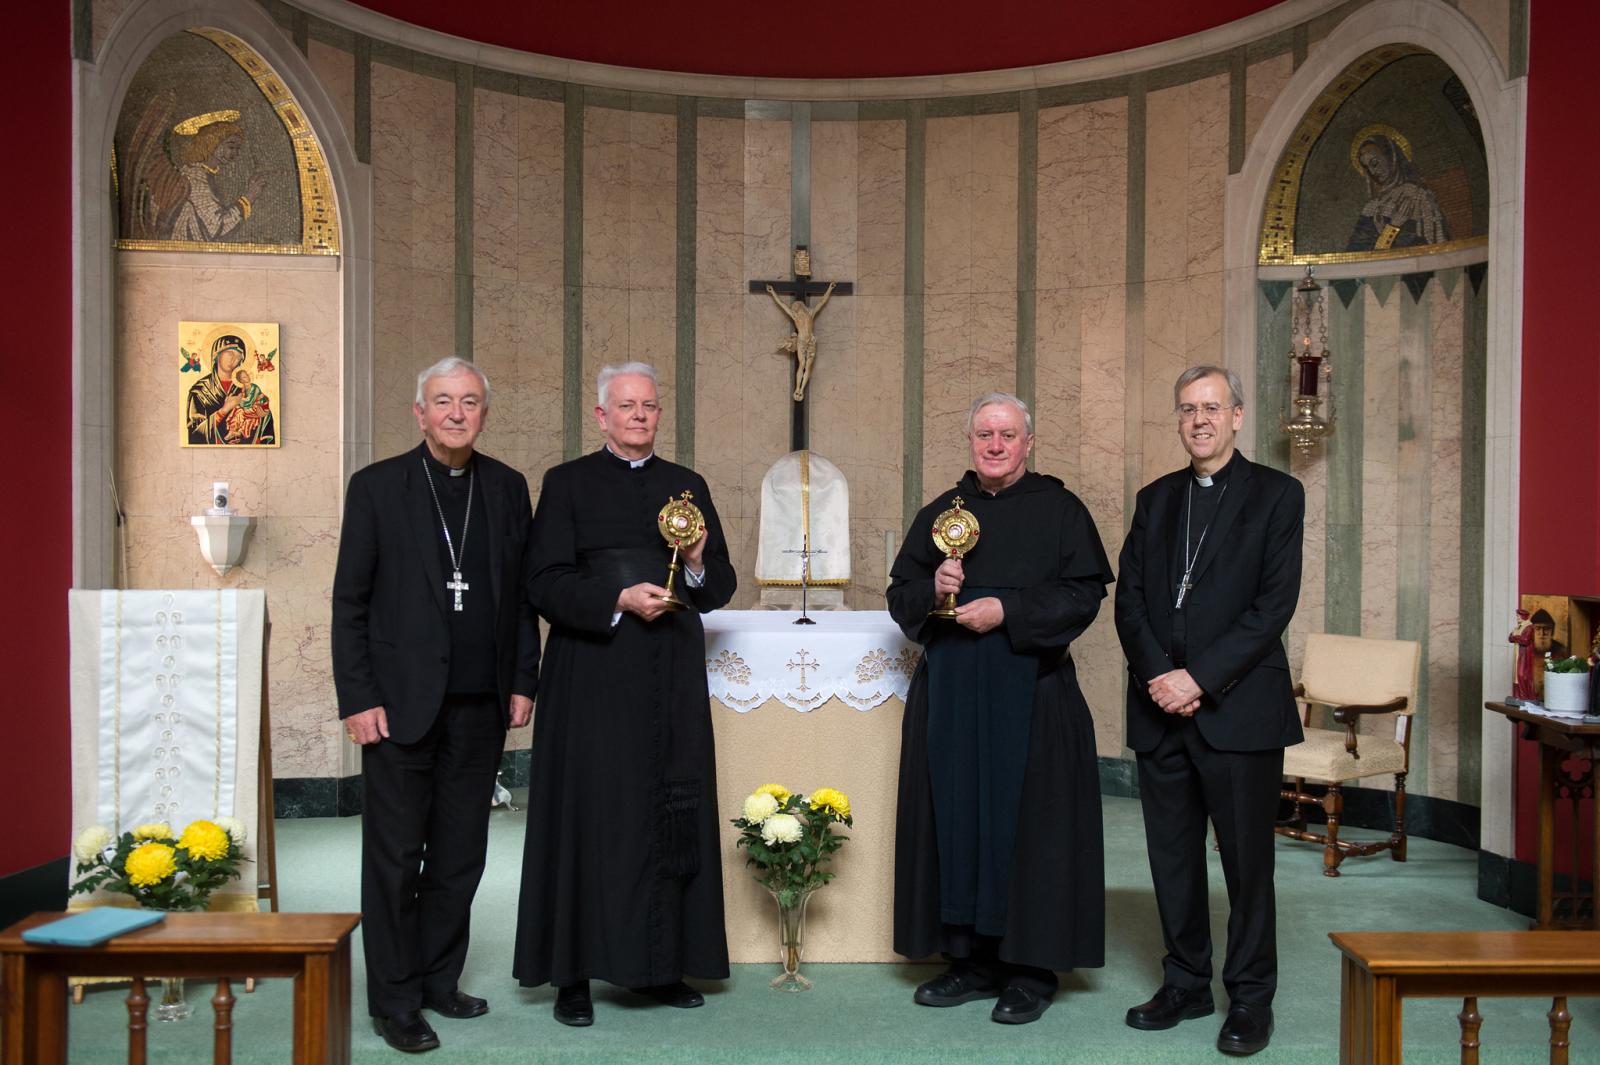 Two parishes receive relics of Blessed Carlo Acutis